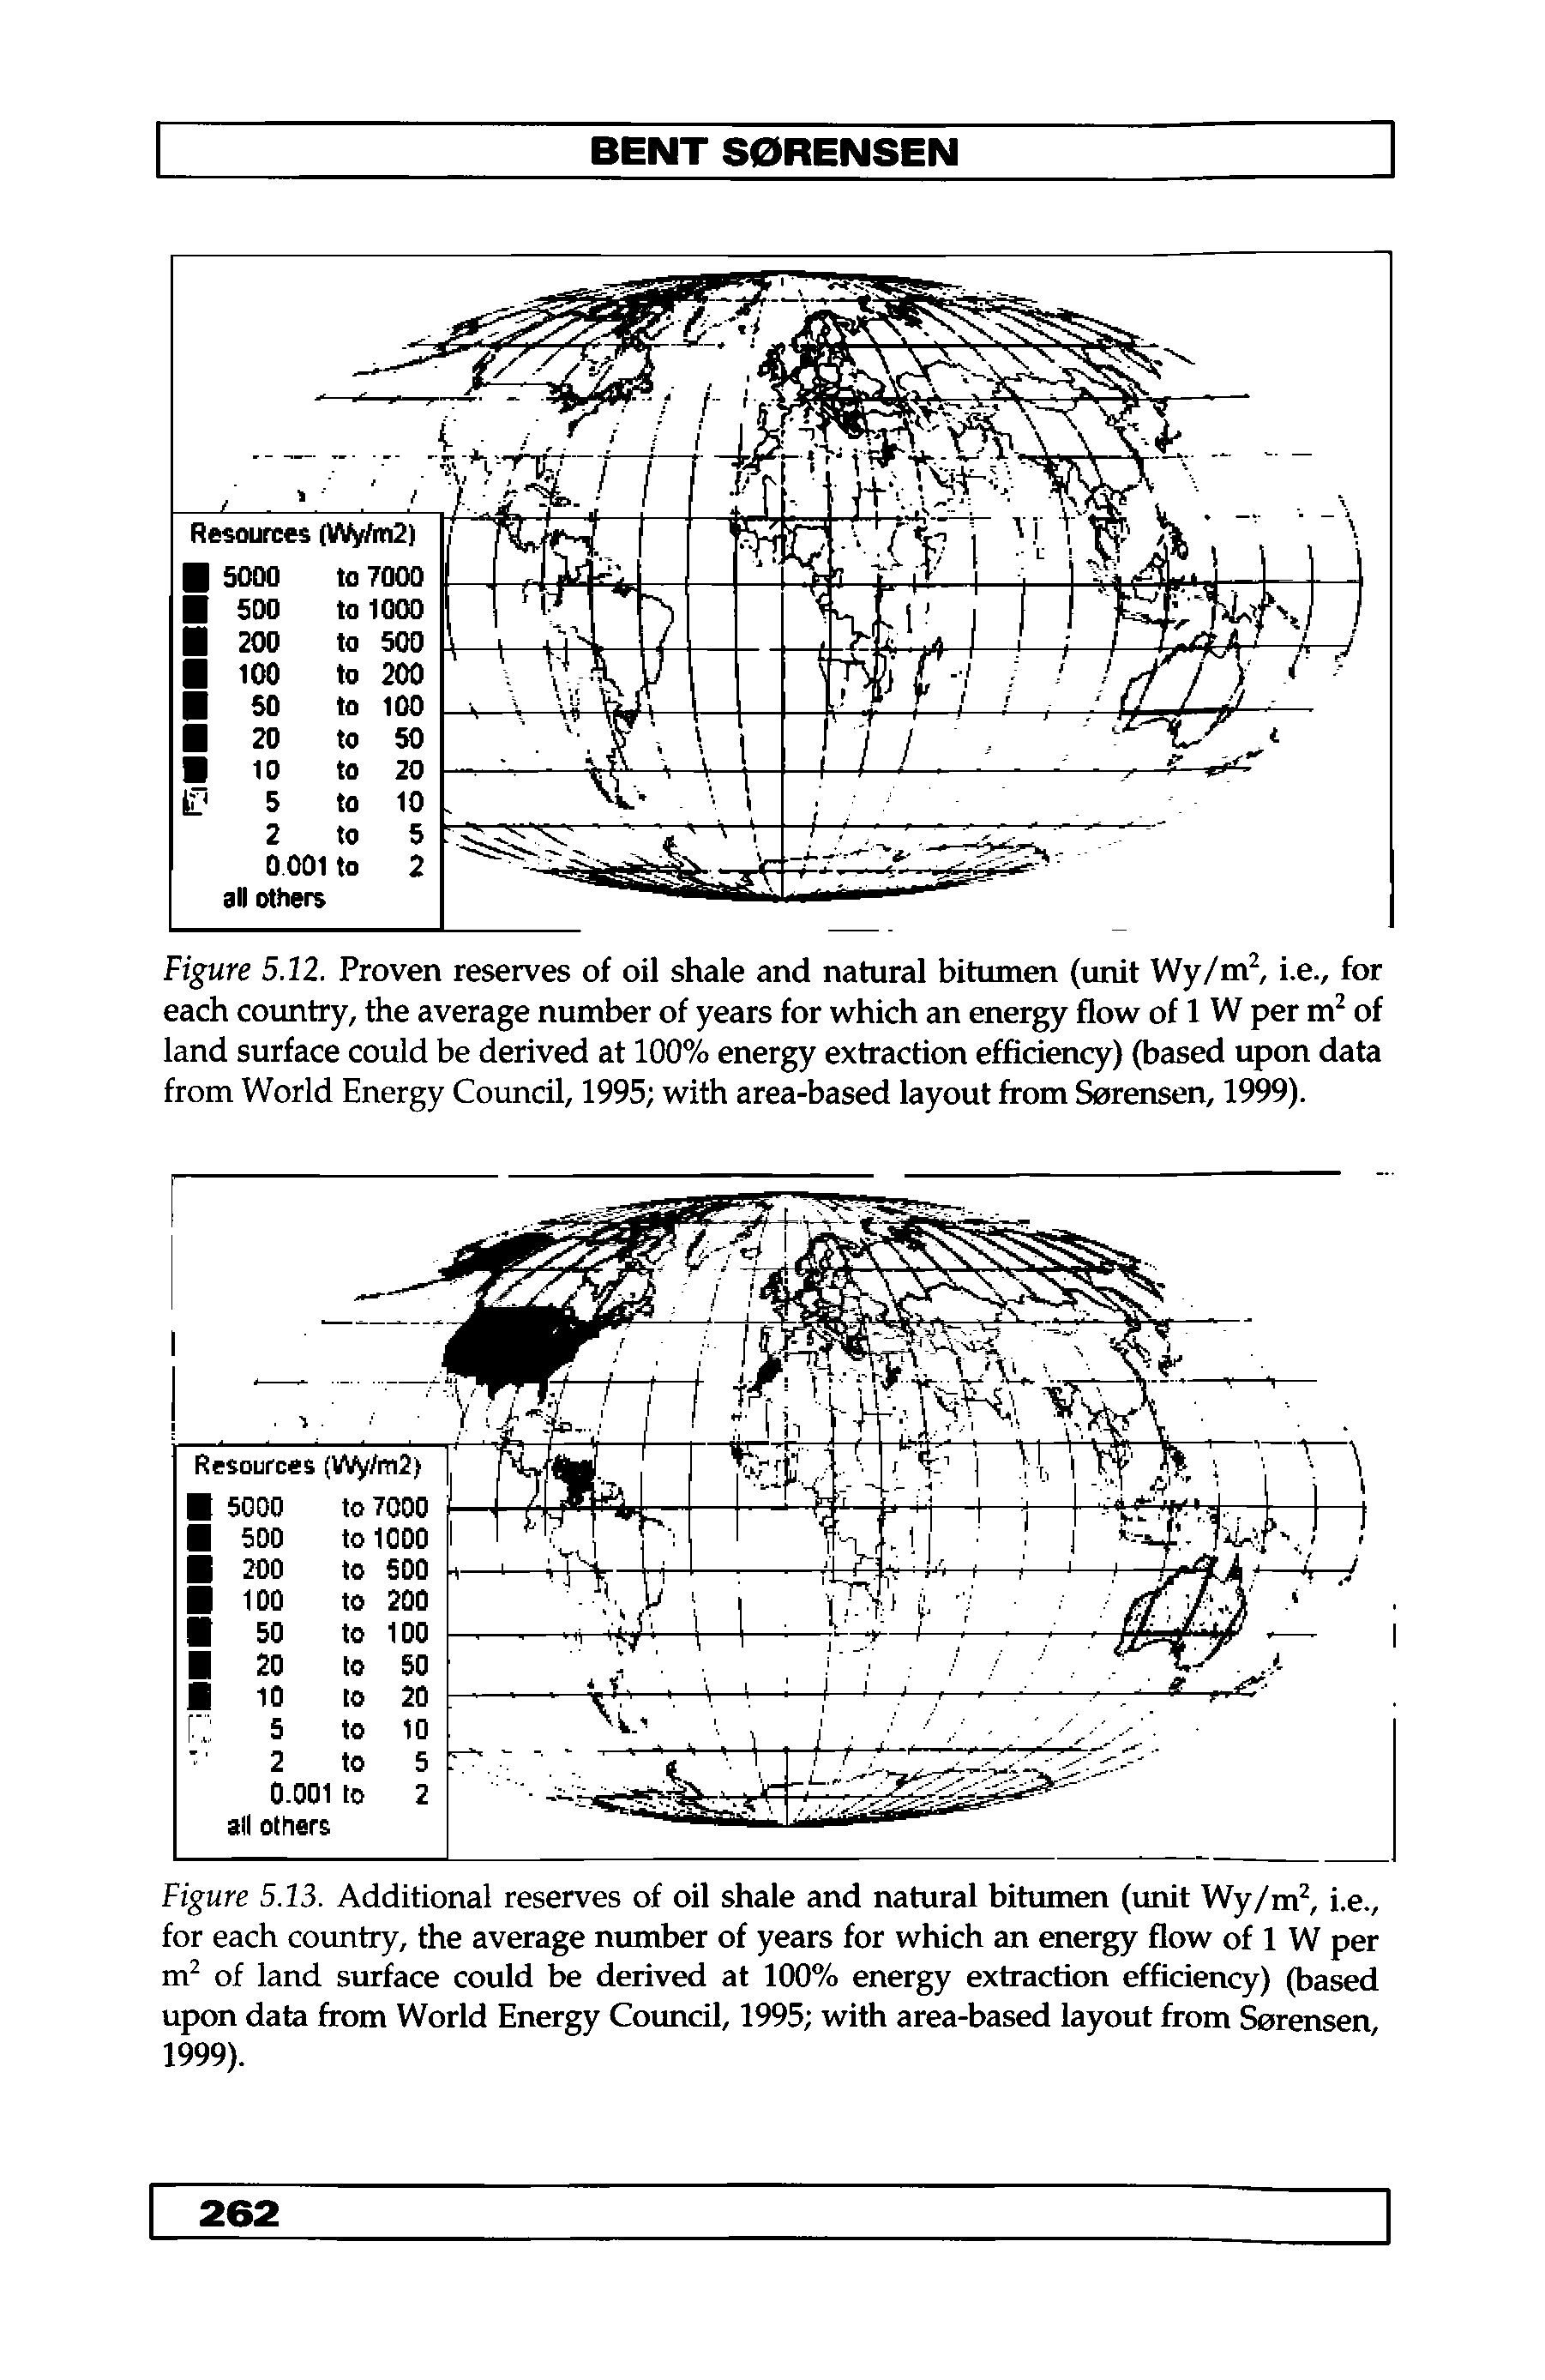 Figure 5.12. Proven reserves of oil shale and natural bitumen (unit Wy/m i.e., for each country, the average number of years for which an energy flow of 1 W per m of land surface could be derived at 100% energy extraction efficiency) (based upon data from World Energy Council, 1995 with area-based layout from Sorensen, 1999).